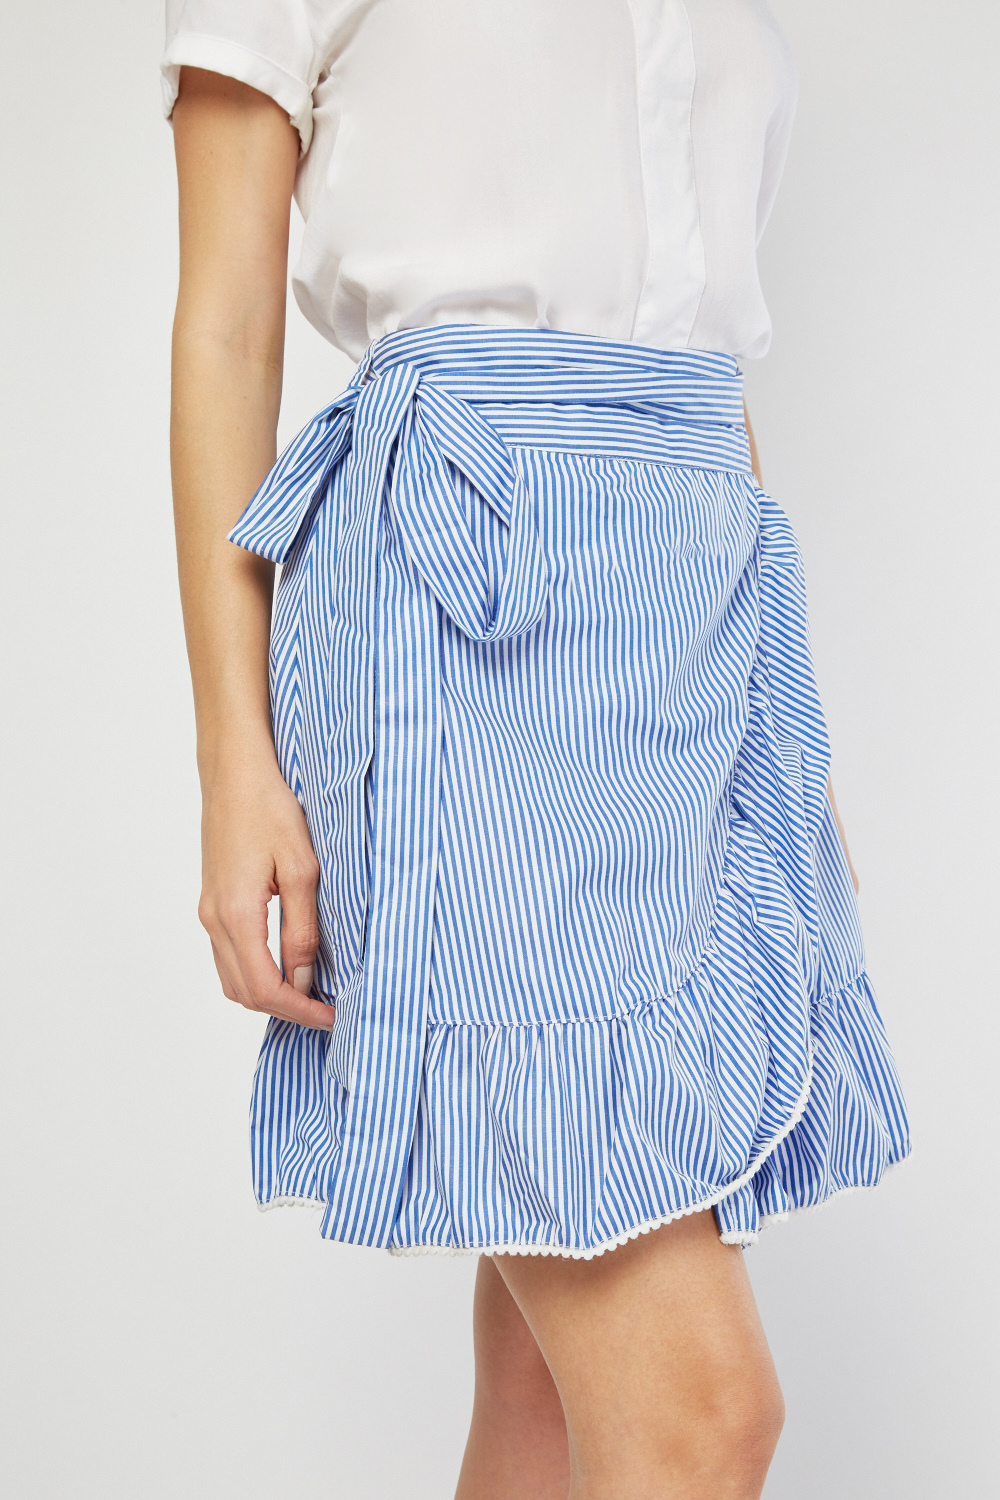 Wrapped Stripe Skirt - Just $3